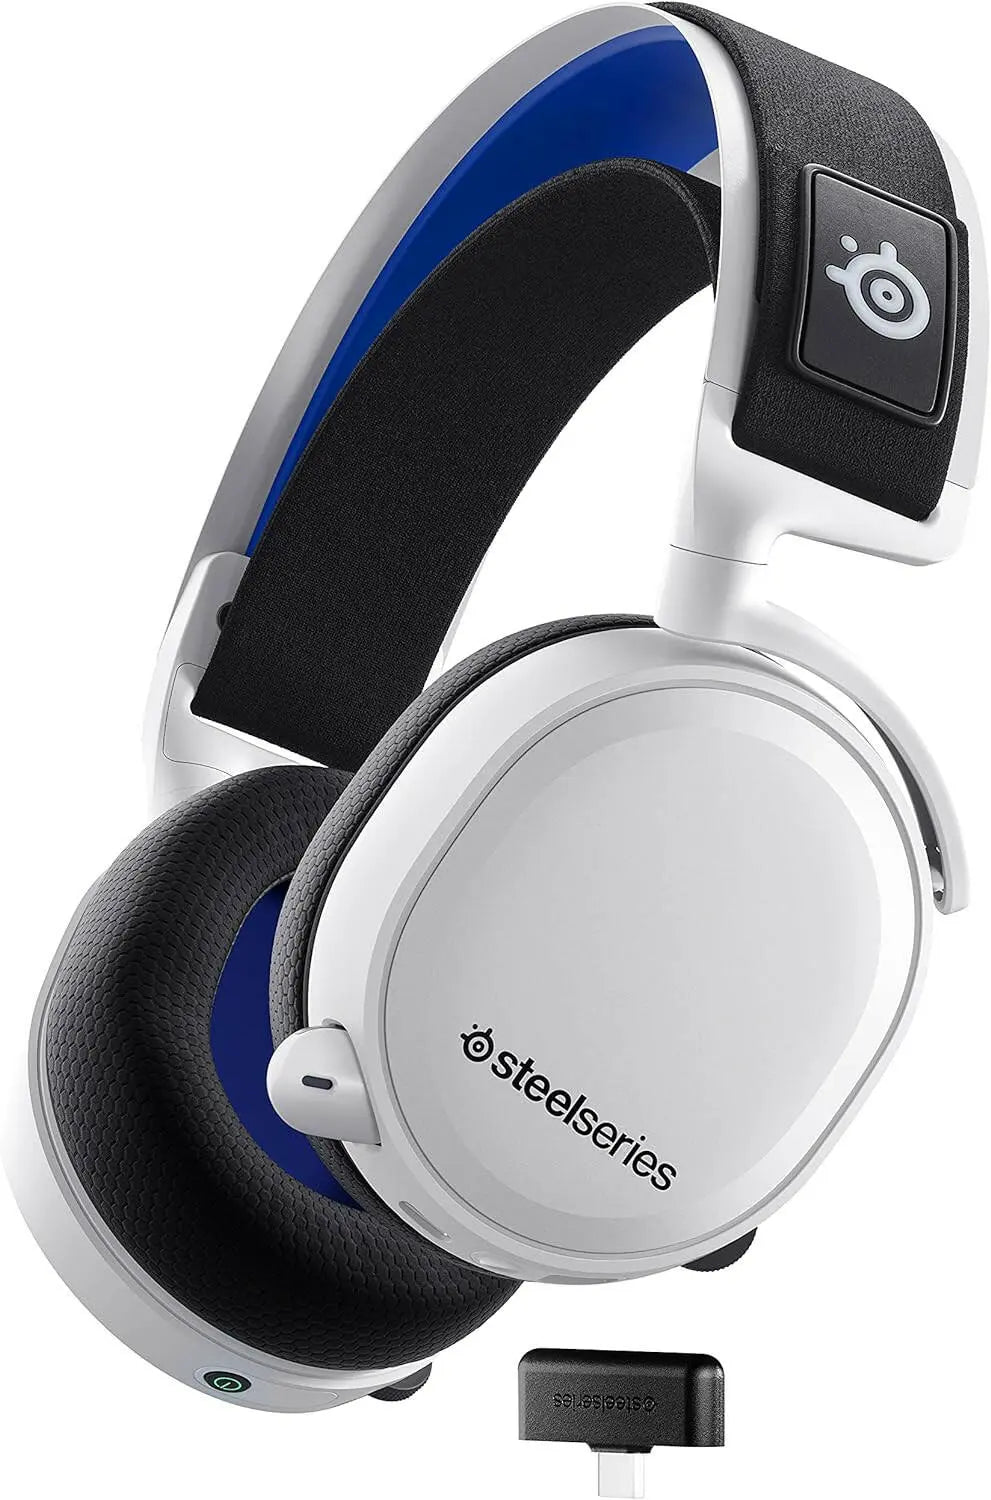 Steelseries Arctis 7P+ Wireless Gaming Headset - Lossless 2.4 Ghz - 30 Hour Battery Life - For Ps5, Ps4, Pc, Mac, Android And Switch - White